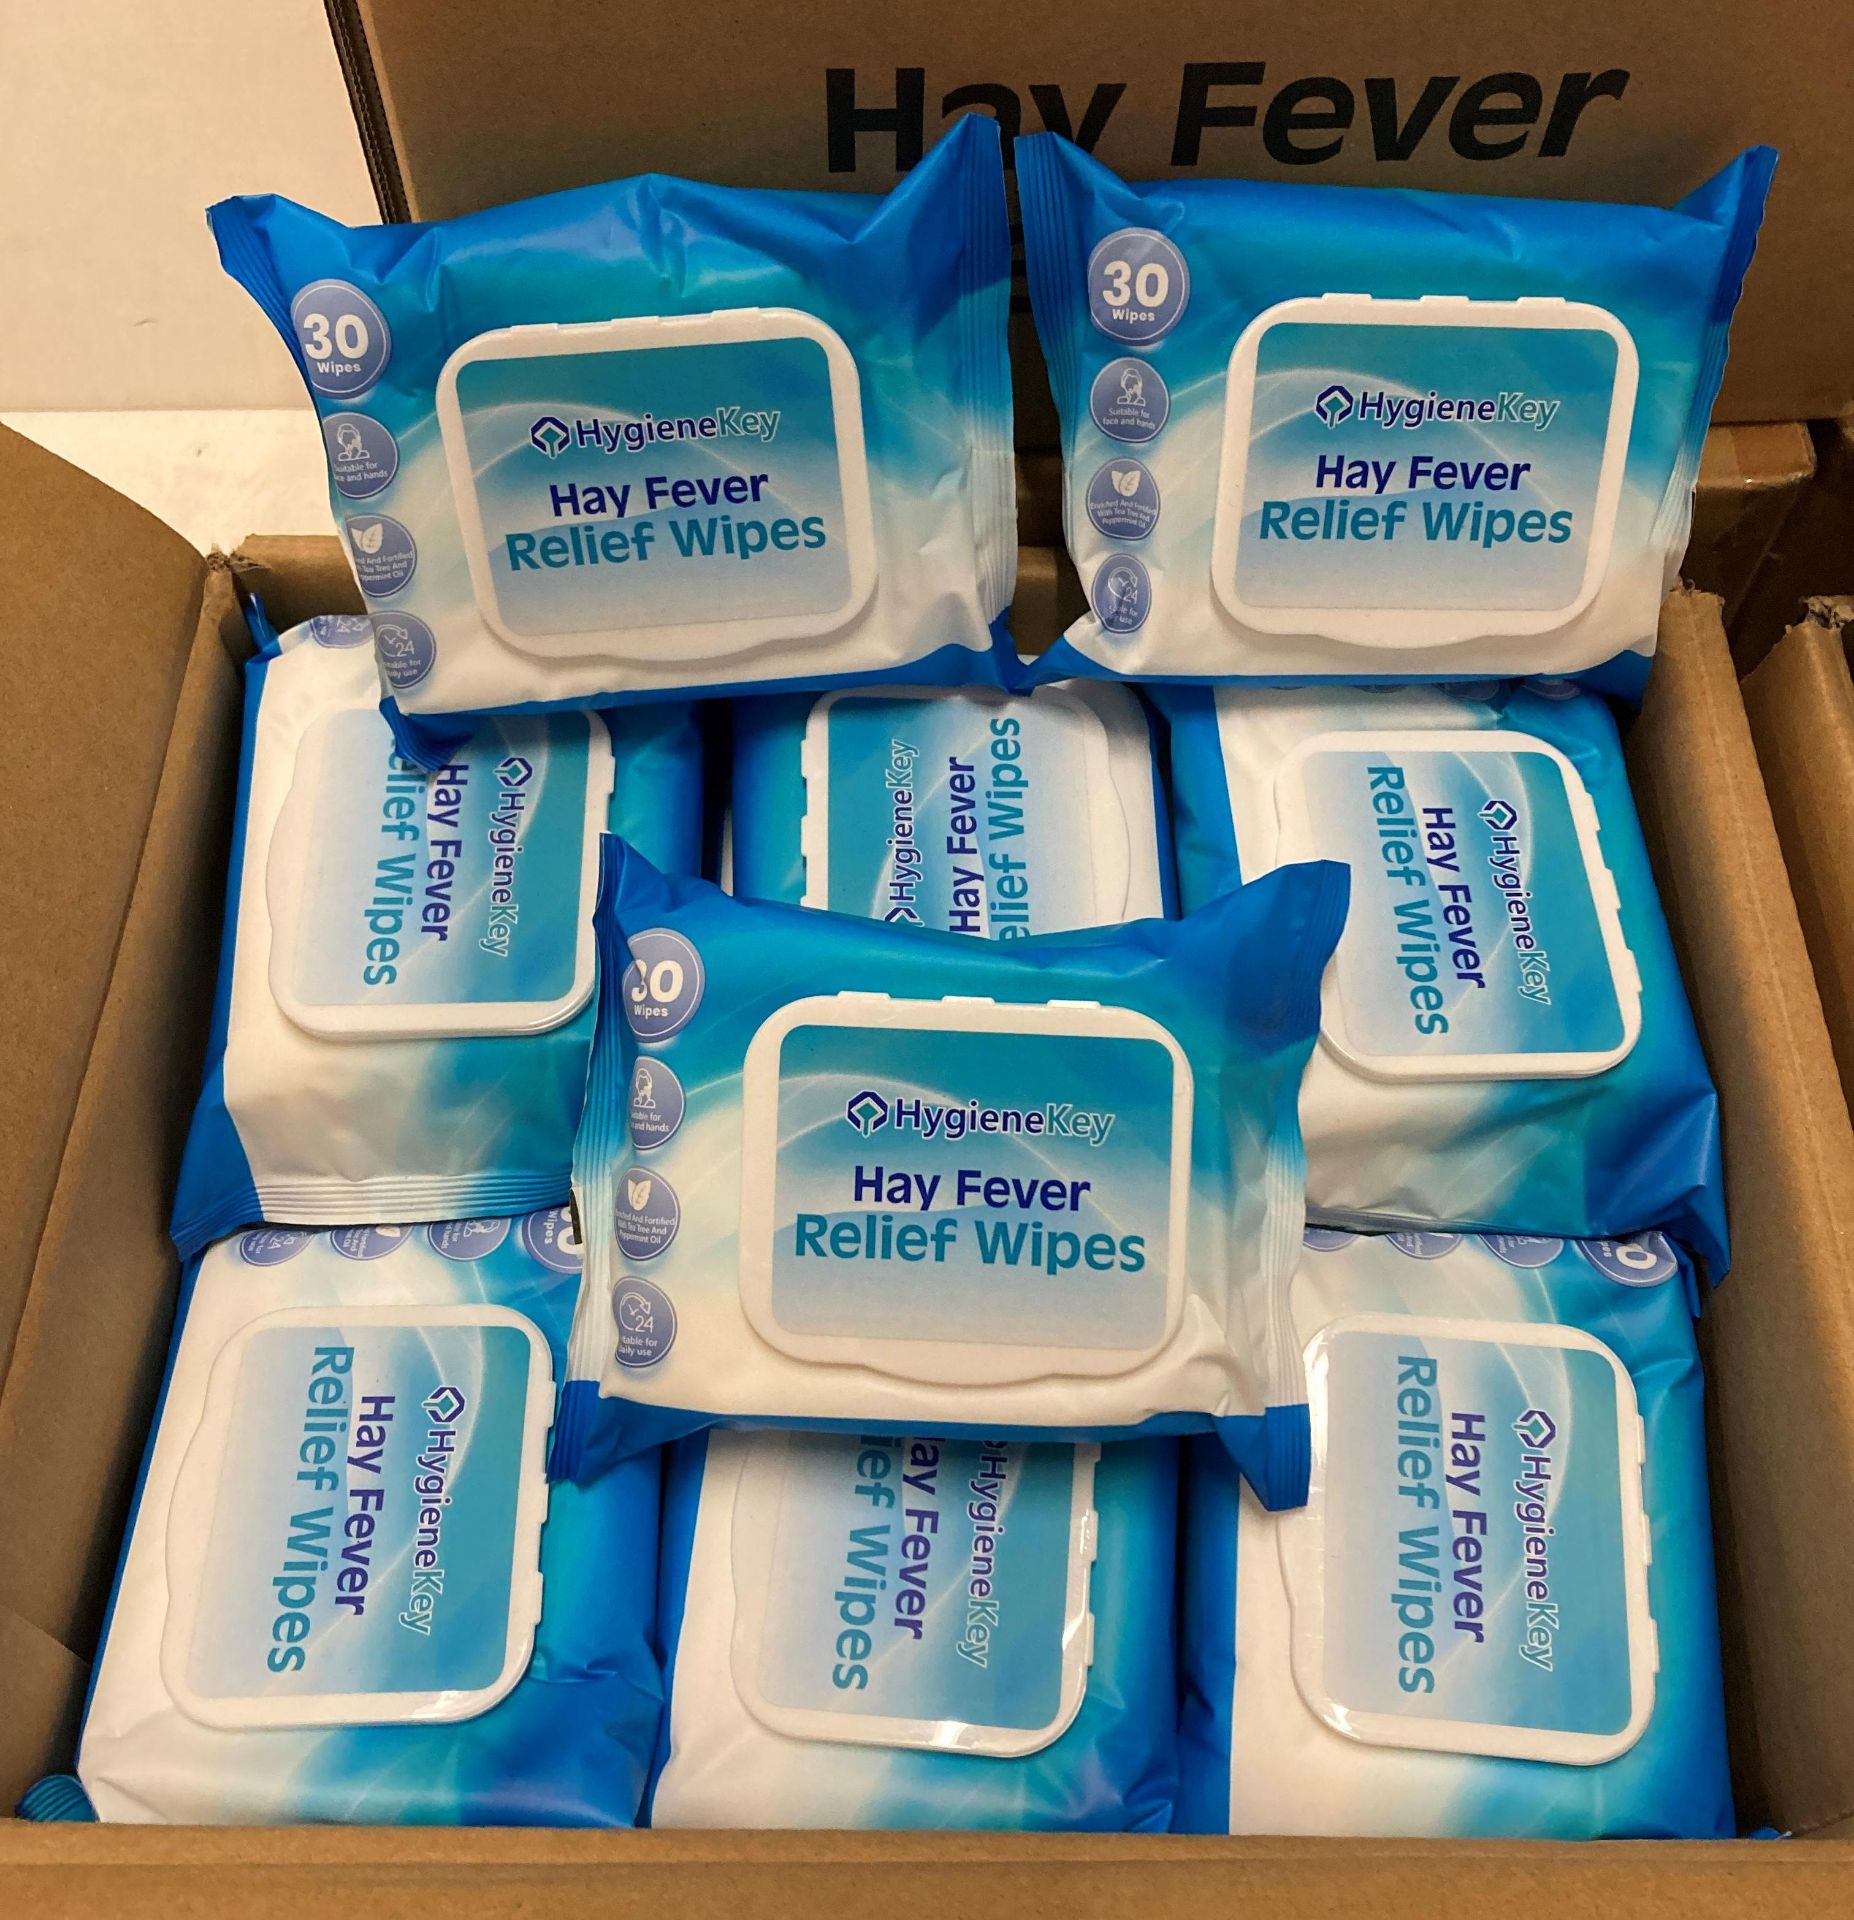 360 x packs of Hygiene Key hay fever relief wipes (30 x wipes per pack - expiry date: 30/05/24) - - Image 2 of 2